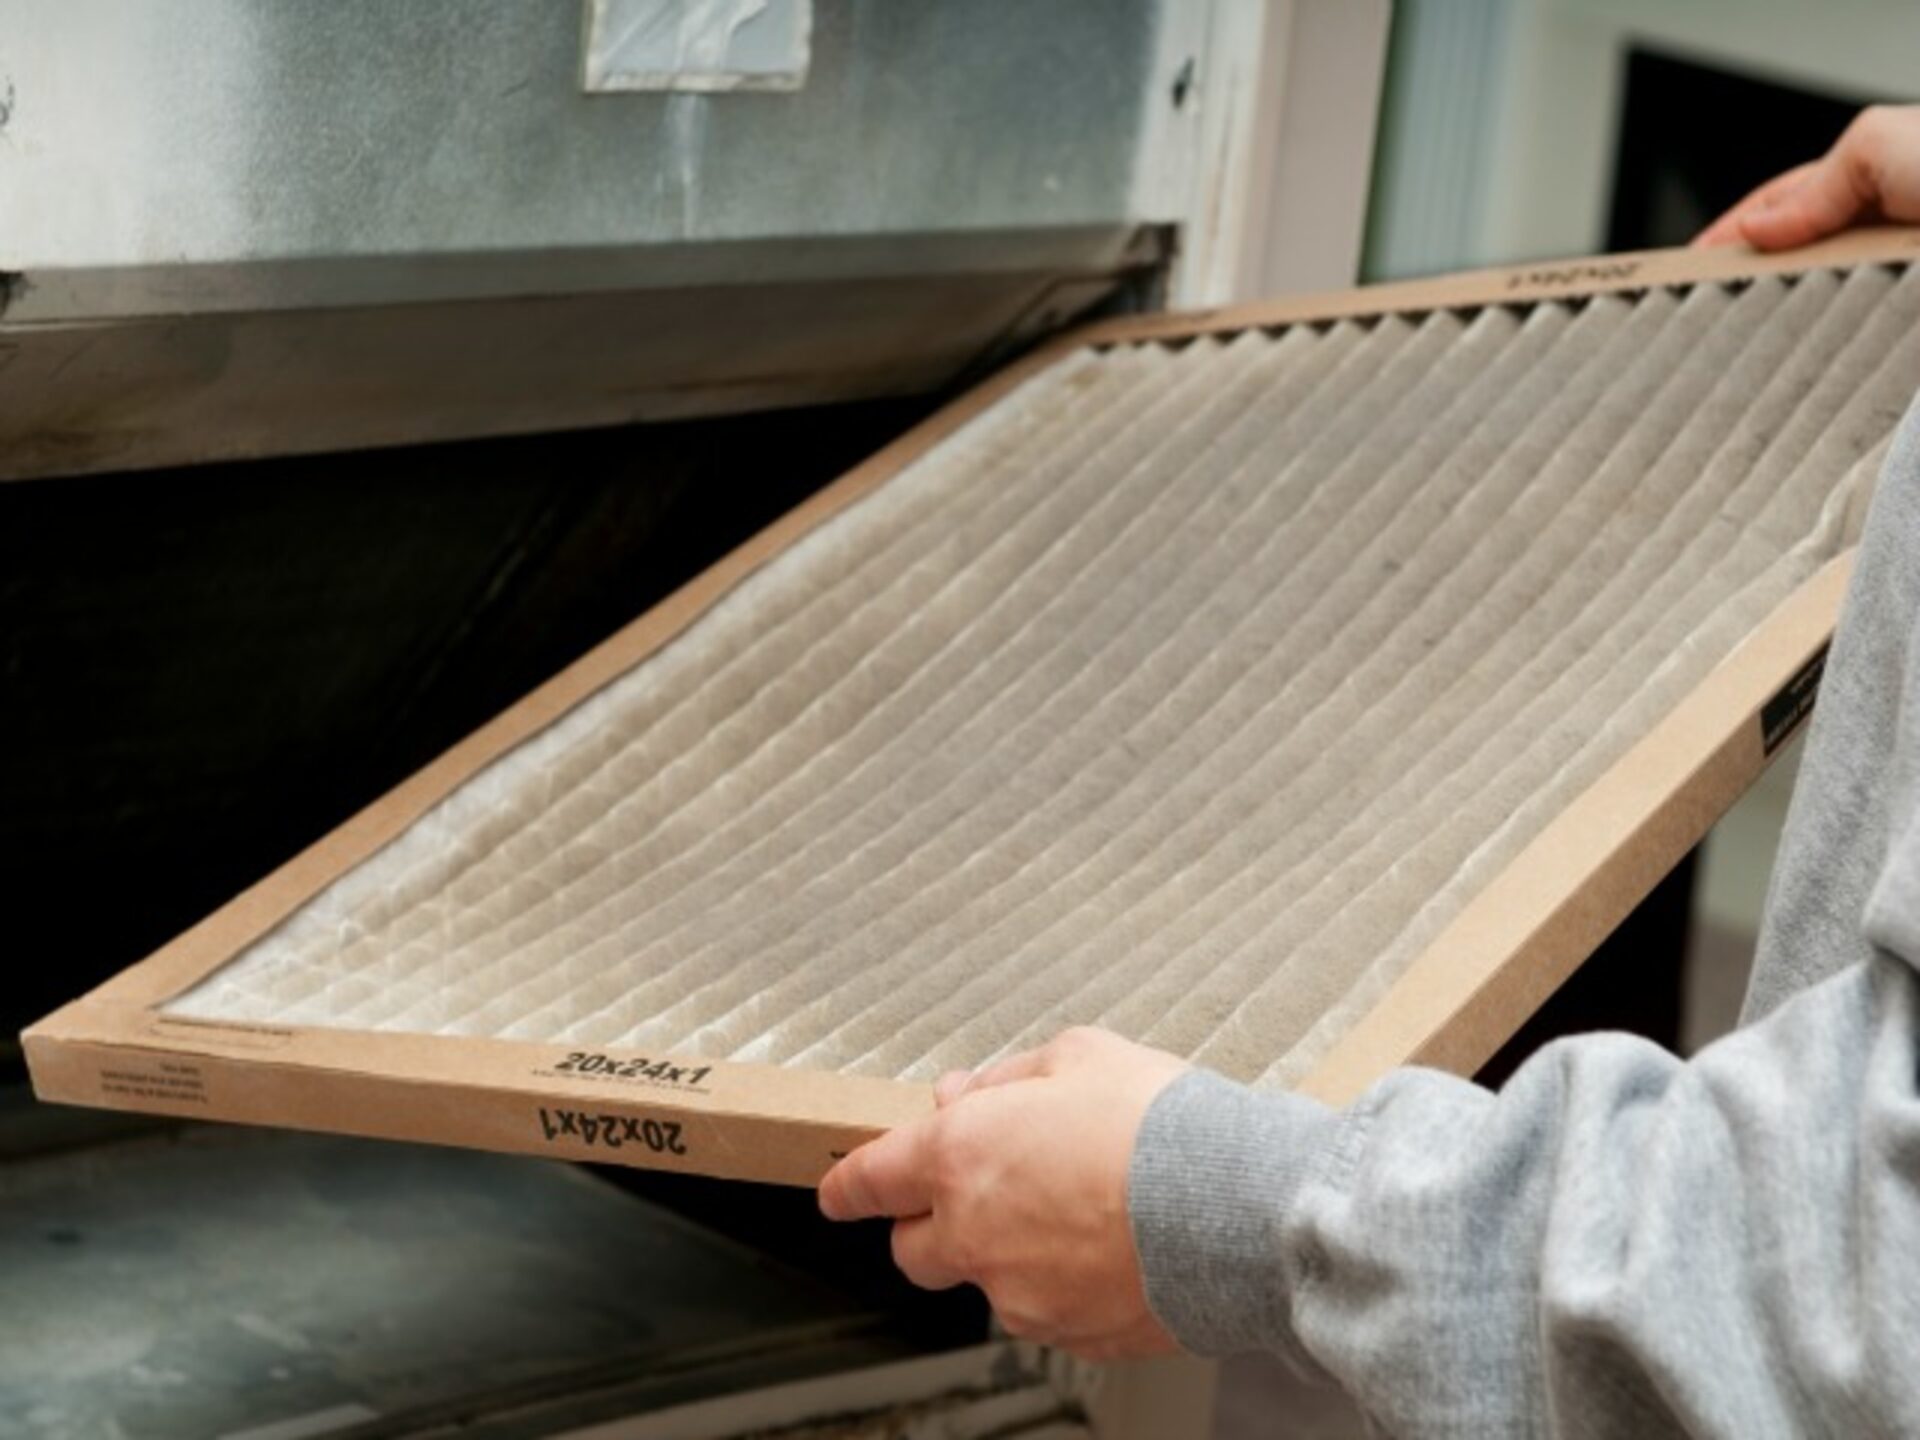 The Cost of Dirty Air Filters